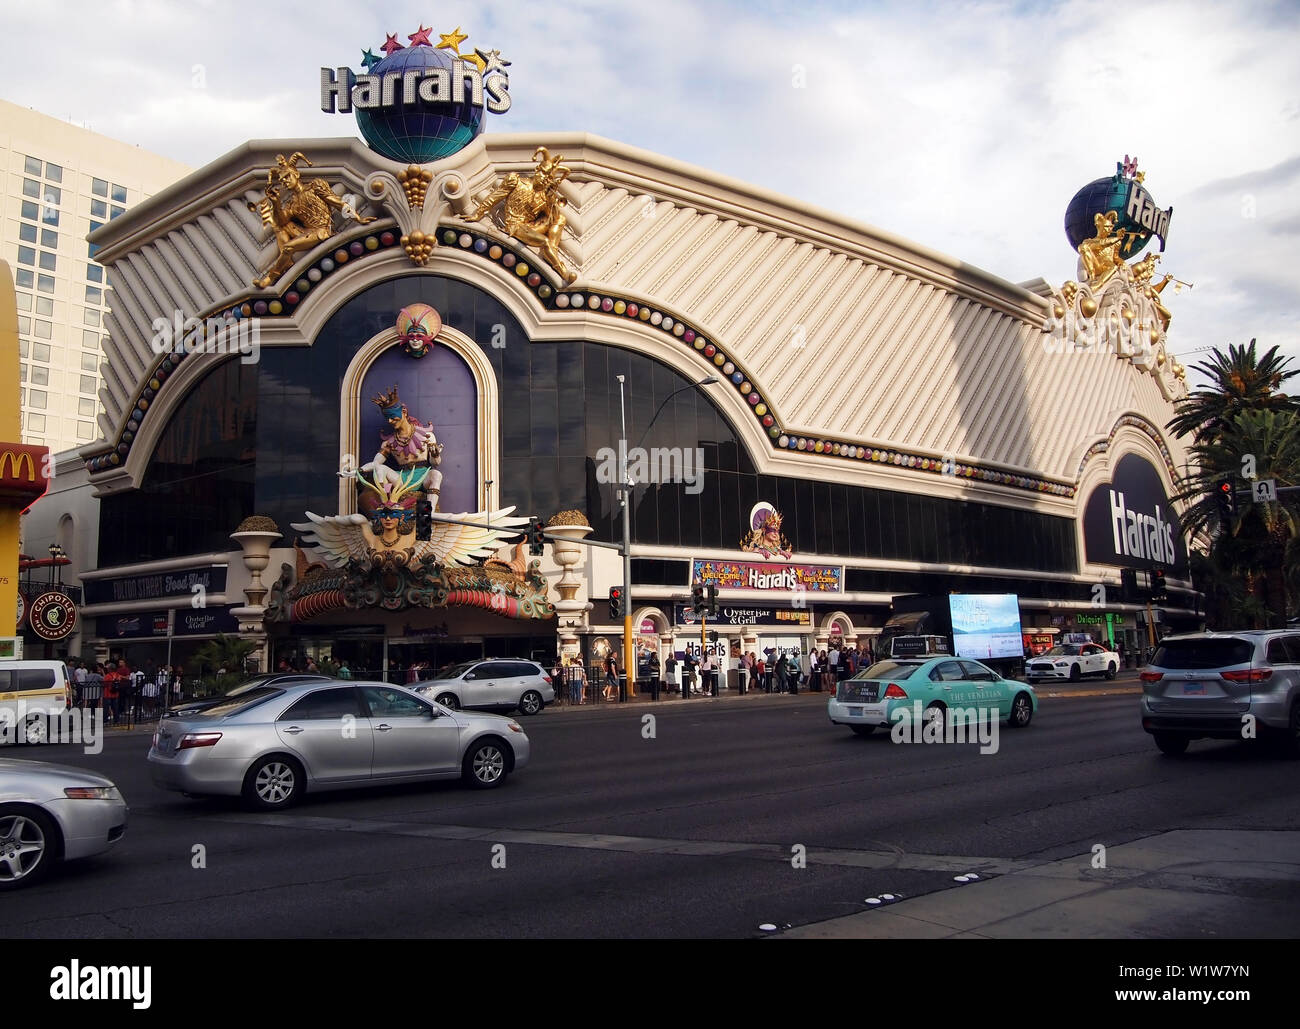 LAS VEGAS, NEVADA - JULY 21, 2018: The Harrah's Casino and Resort in Las Vegas, when it boasted a colorful Mardi Gras Carnival theme, from 1992 until Stock Photo